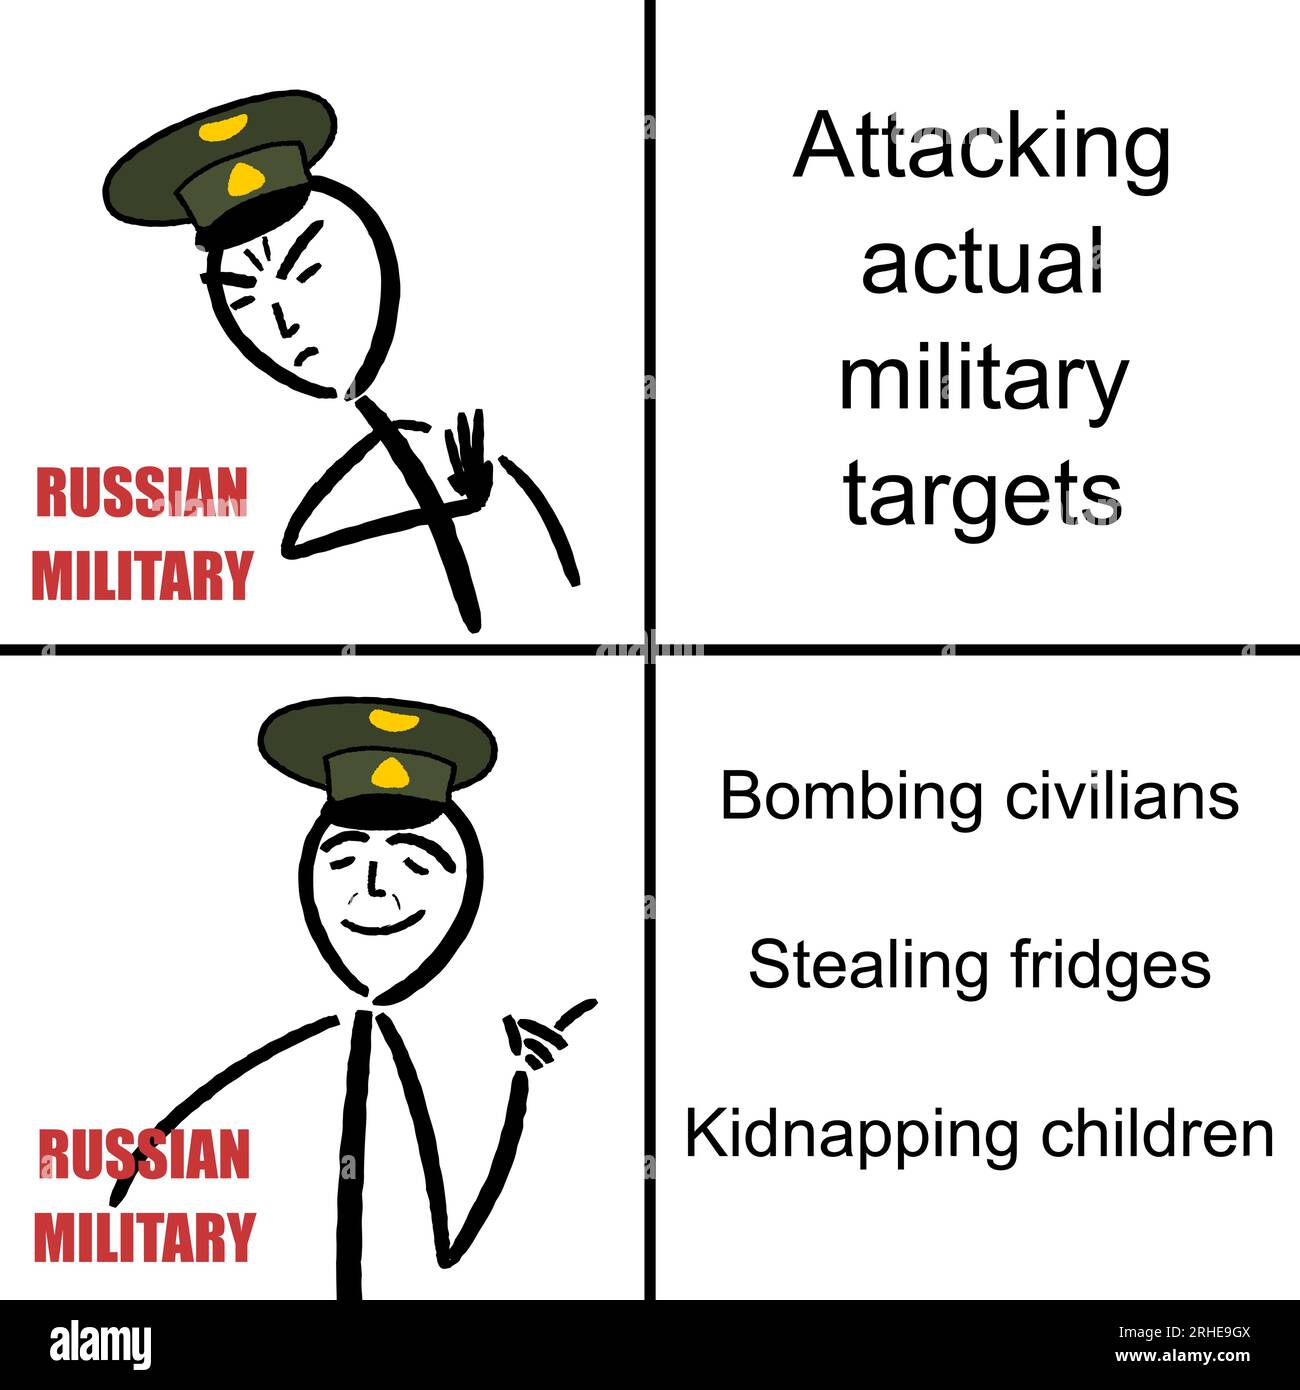 Russian invasion of Ukraine - bombing civilian targets and other war crimes. Funny meme for social media sharing. Stock Vector